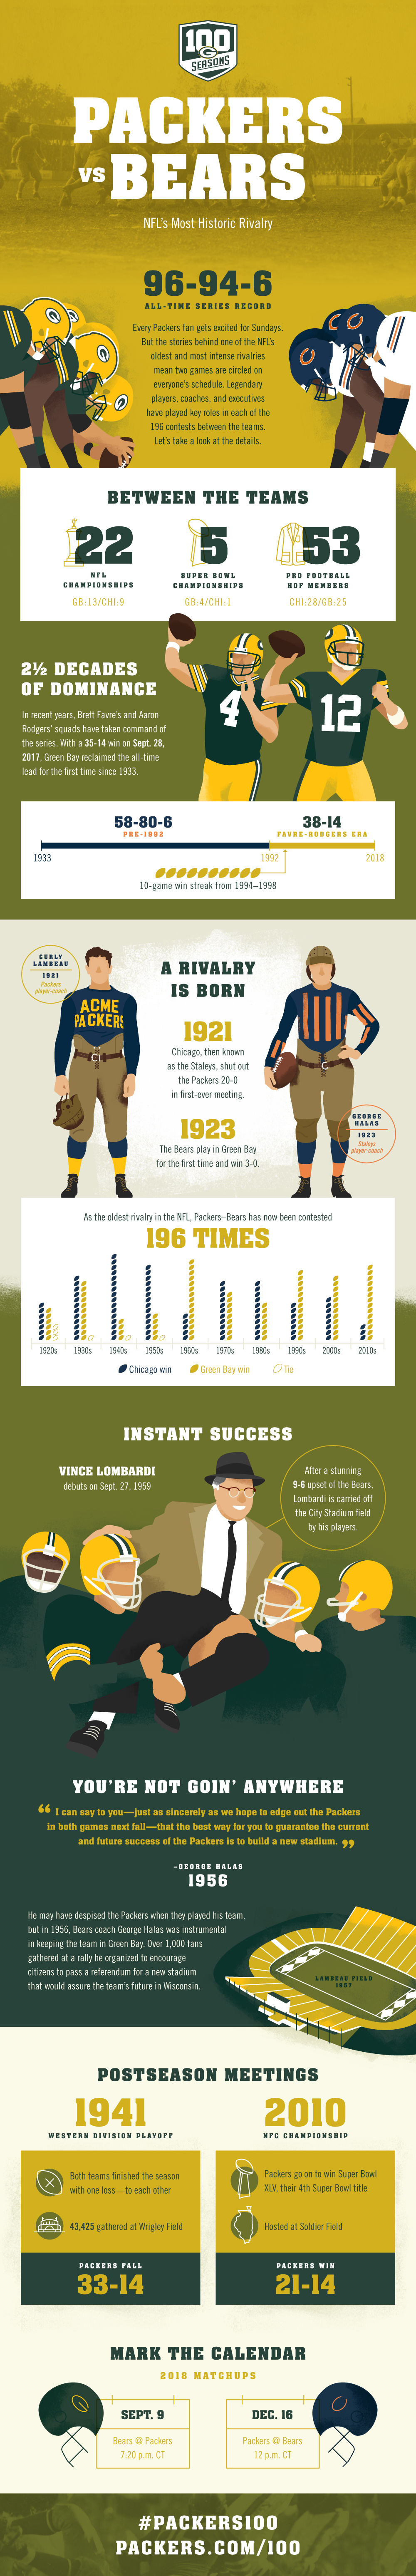 Packers vs. Bears | NFL’s Most Historic Rivalry